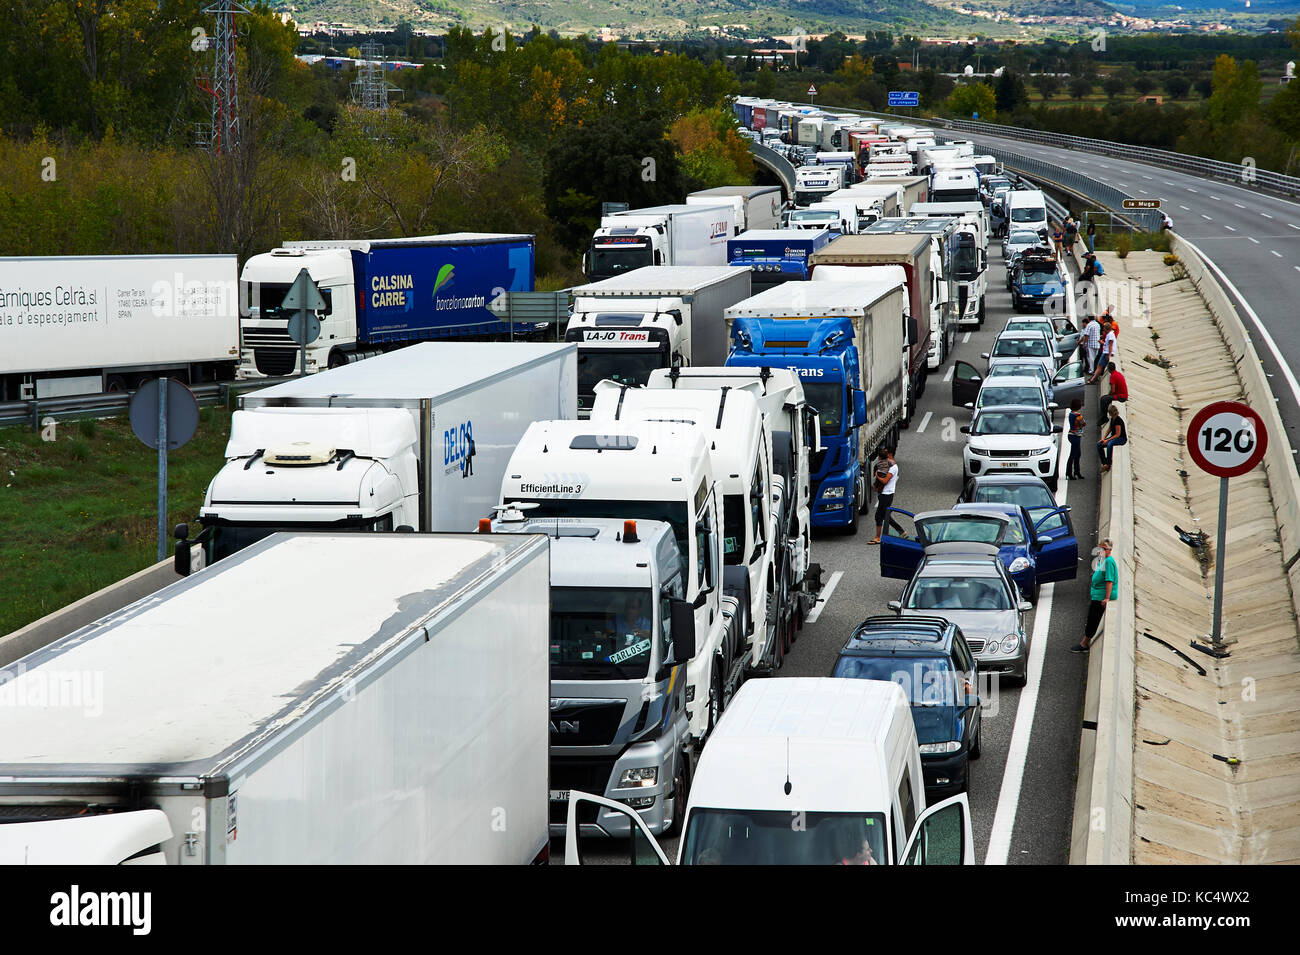 Girona, Spain. 3 October, 2017. The AP7 highway has been blocked by the pro-independence citizens in defence of rights and freedom after Spanish Guardia Civil violence during the referendum day. Credit: Pablo Guillen/Alamy Live News Stock Photo